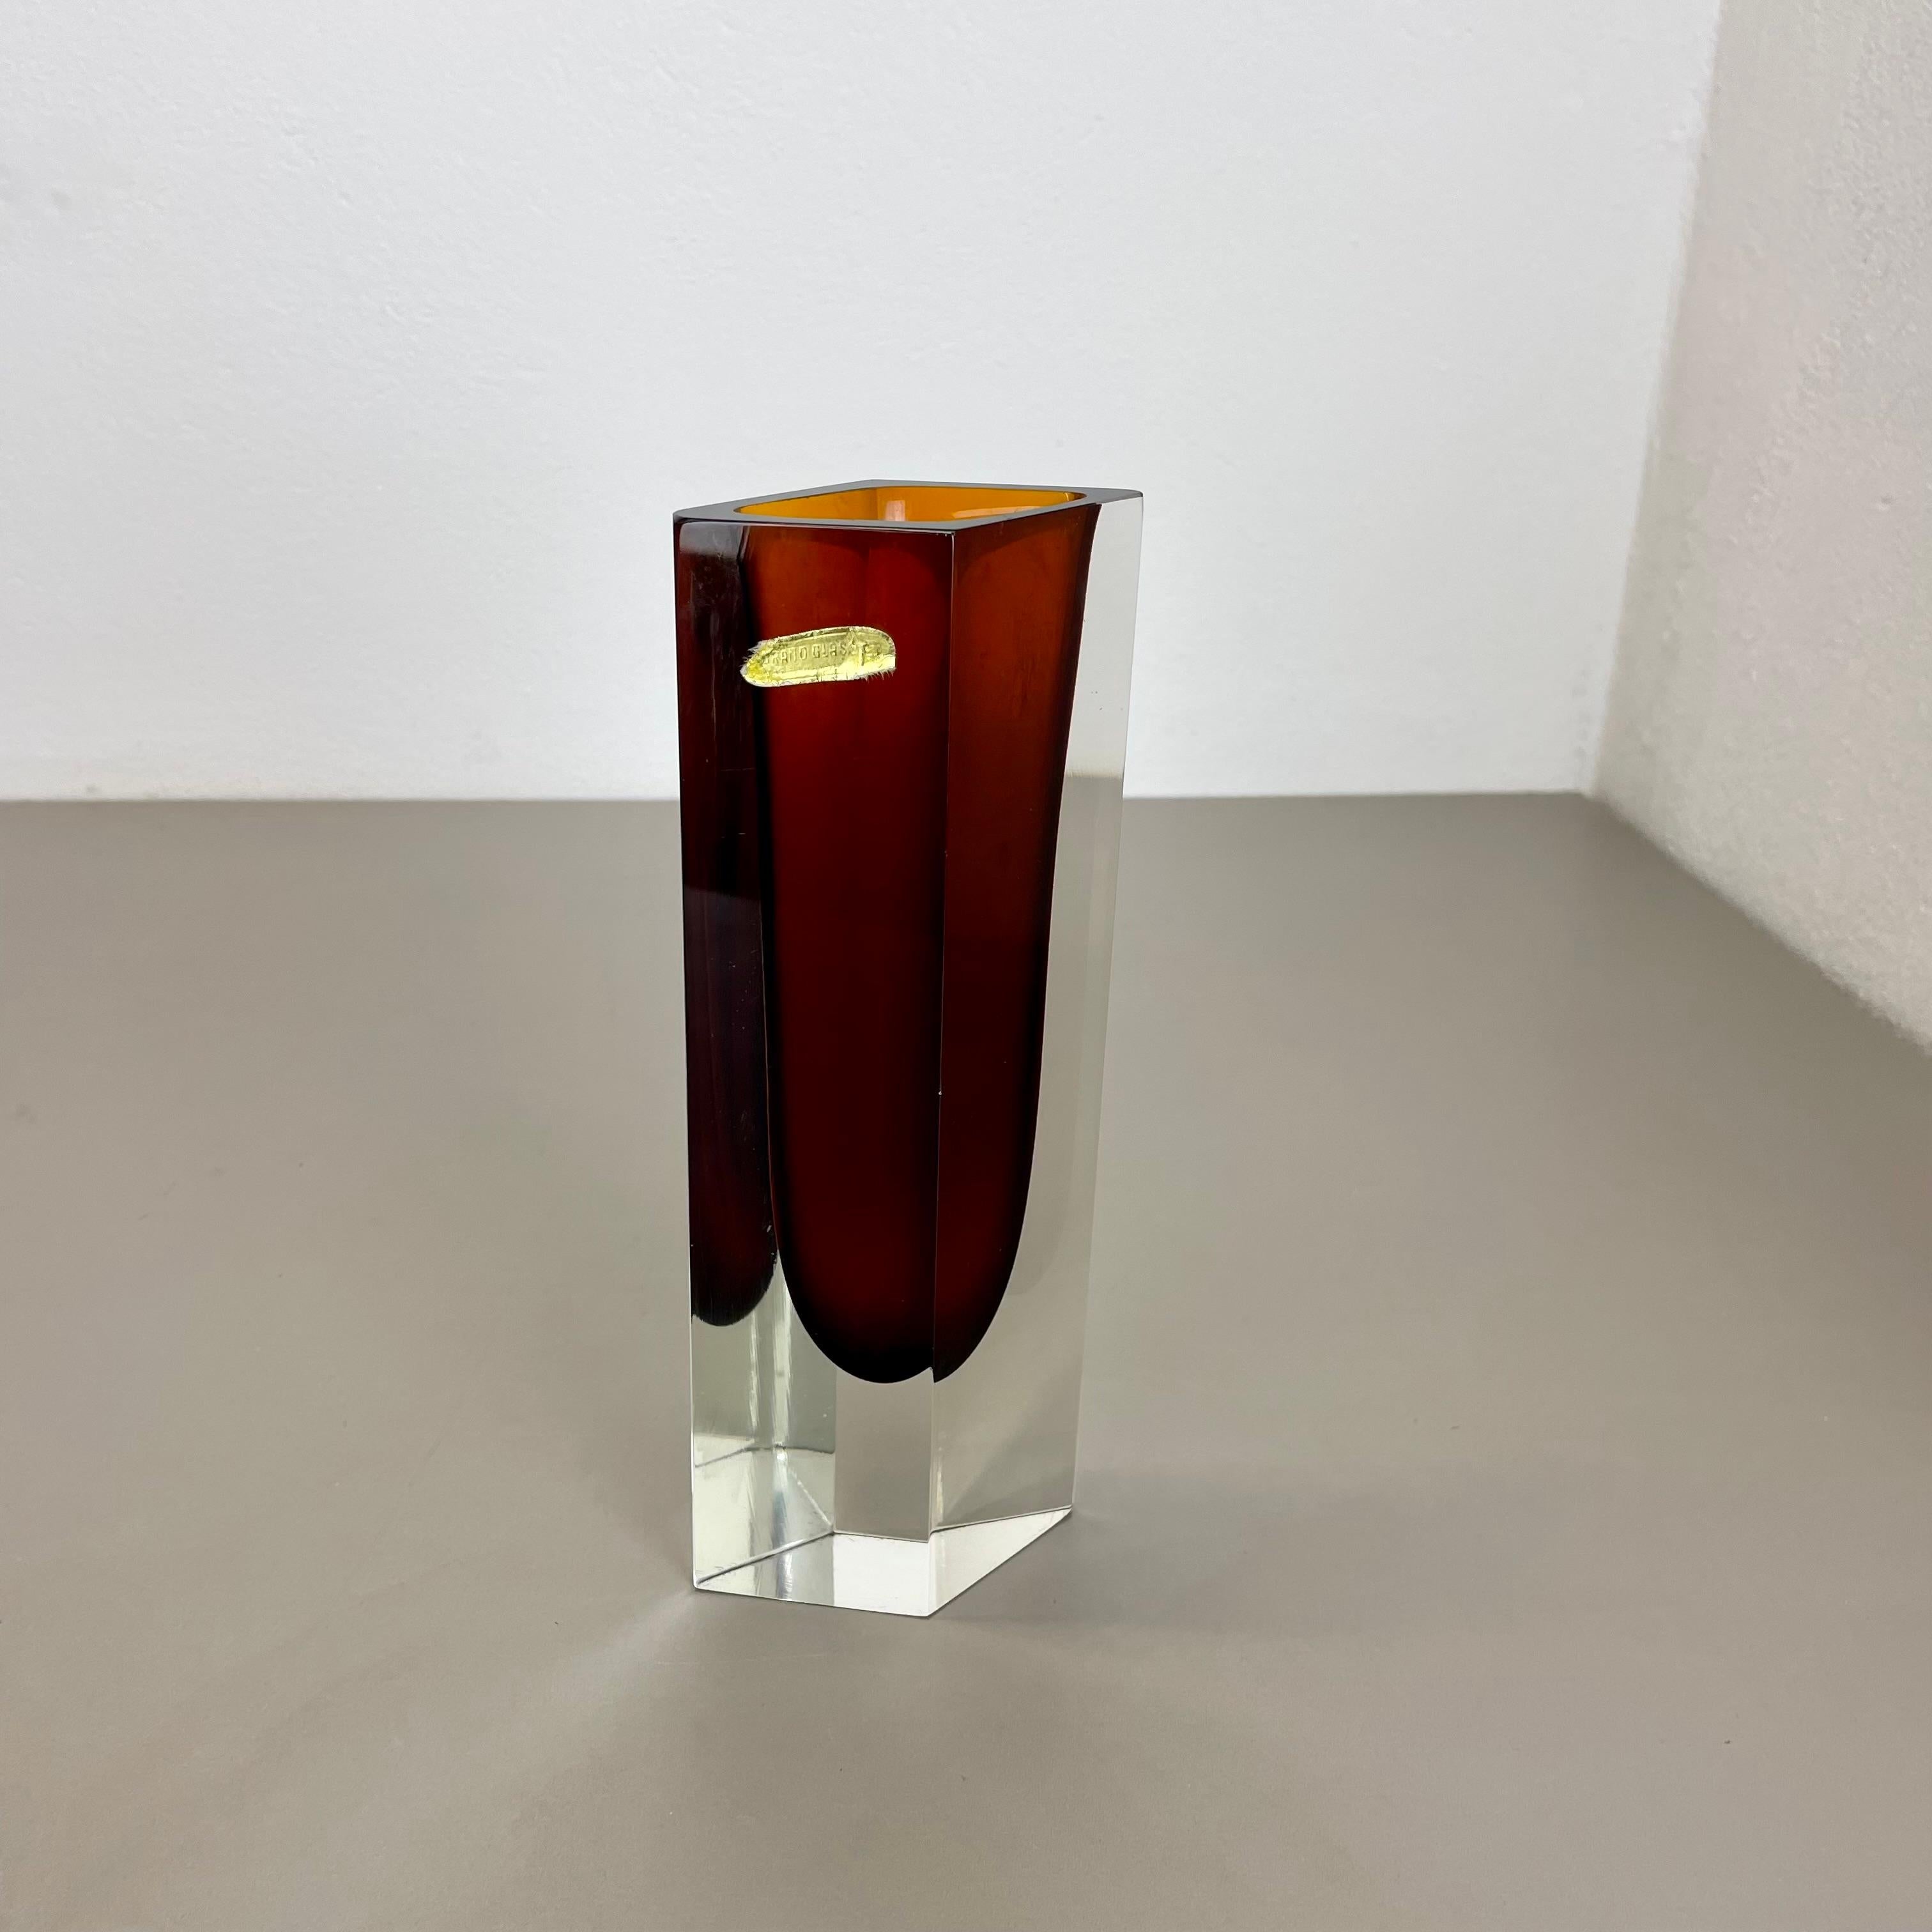 Large 25cm ochre Murano Glass Sommerso Vase, Flavio Poli Attributed, Italy 1970s For Sale 11